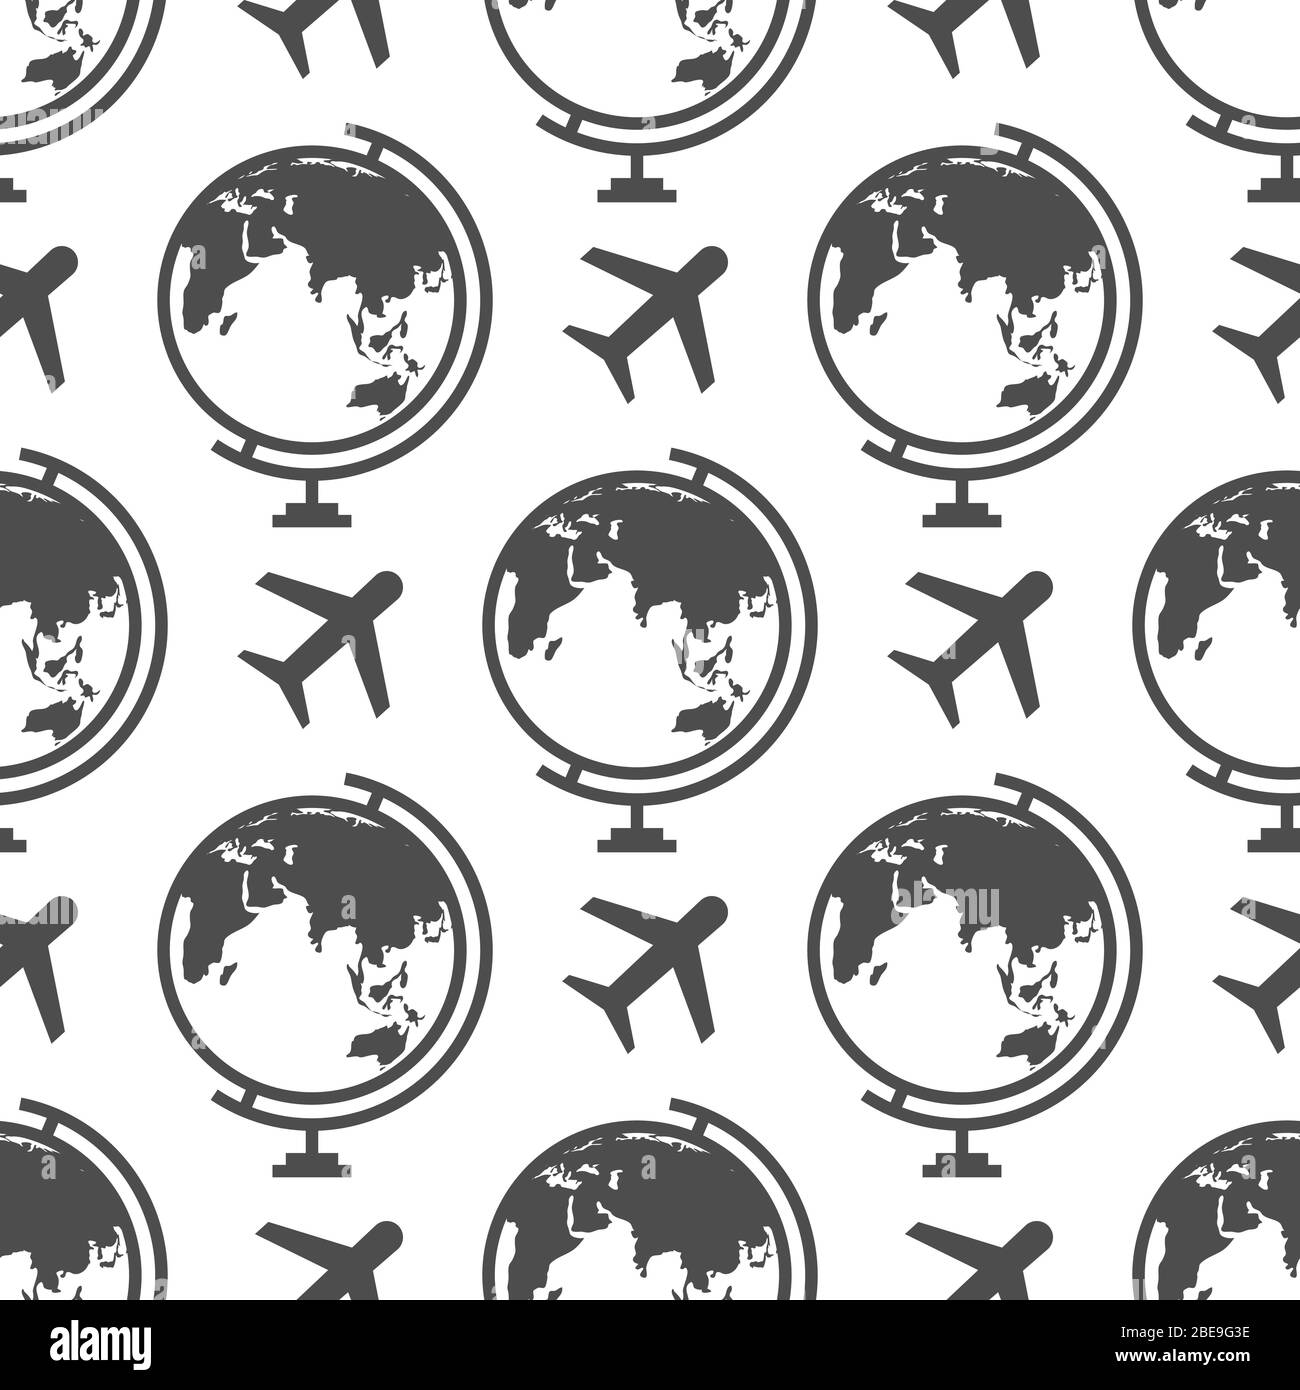 Globe and airplane seamless pattern - geographical or travel background. Vector illustration Stock Vector